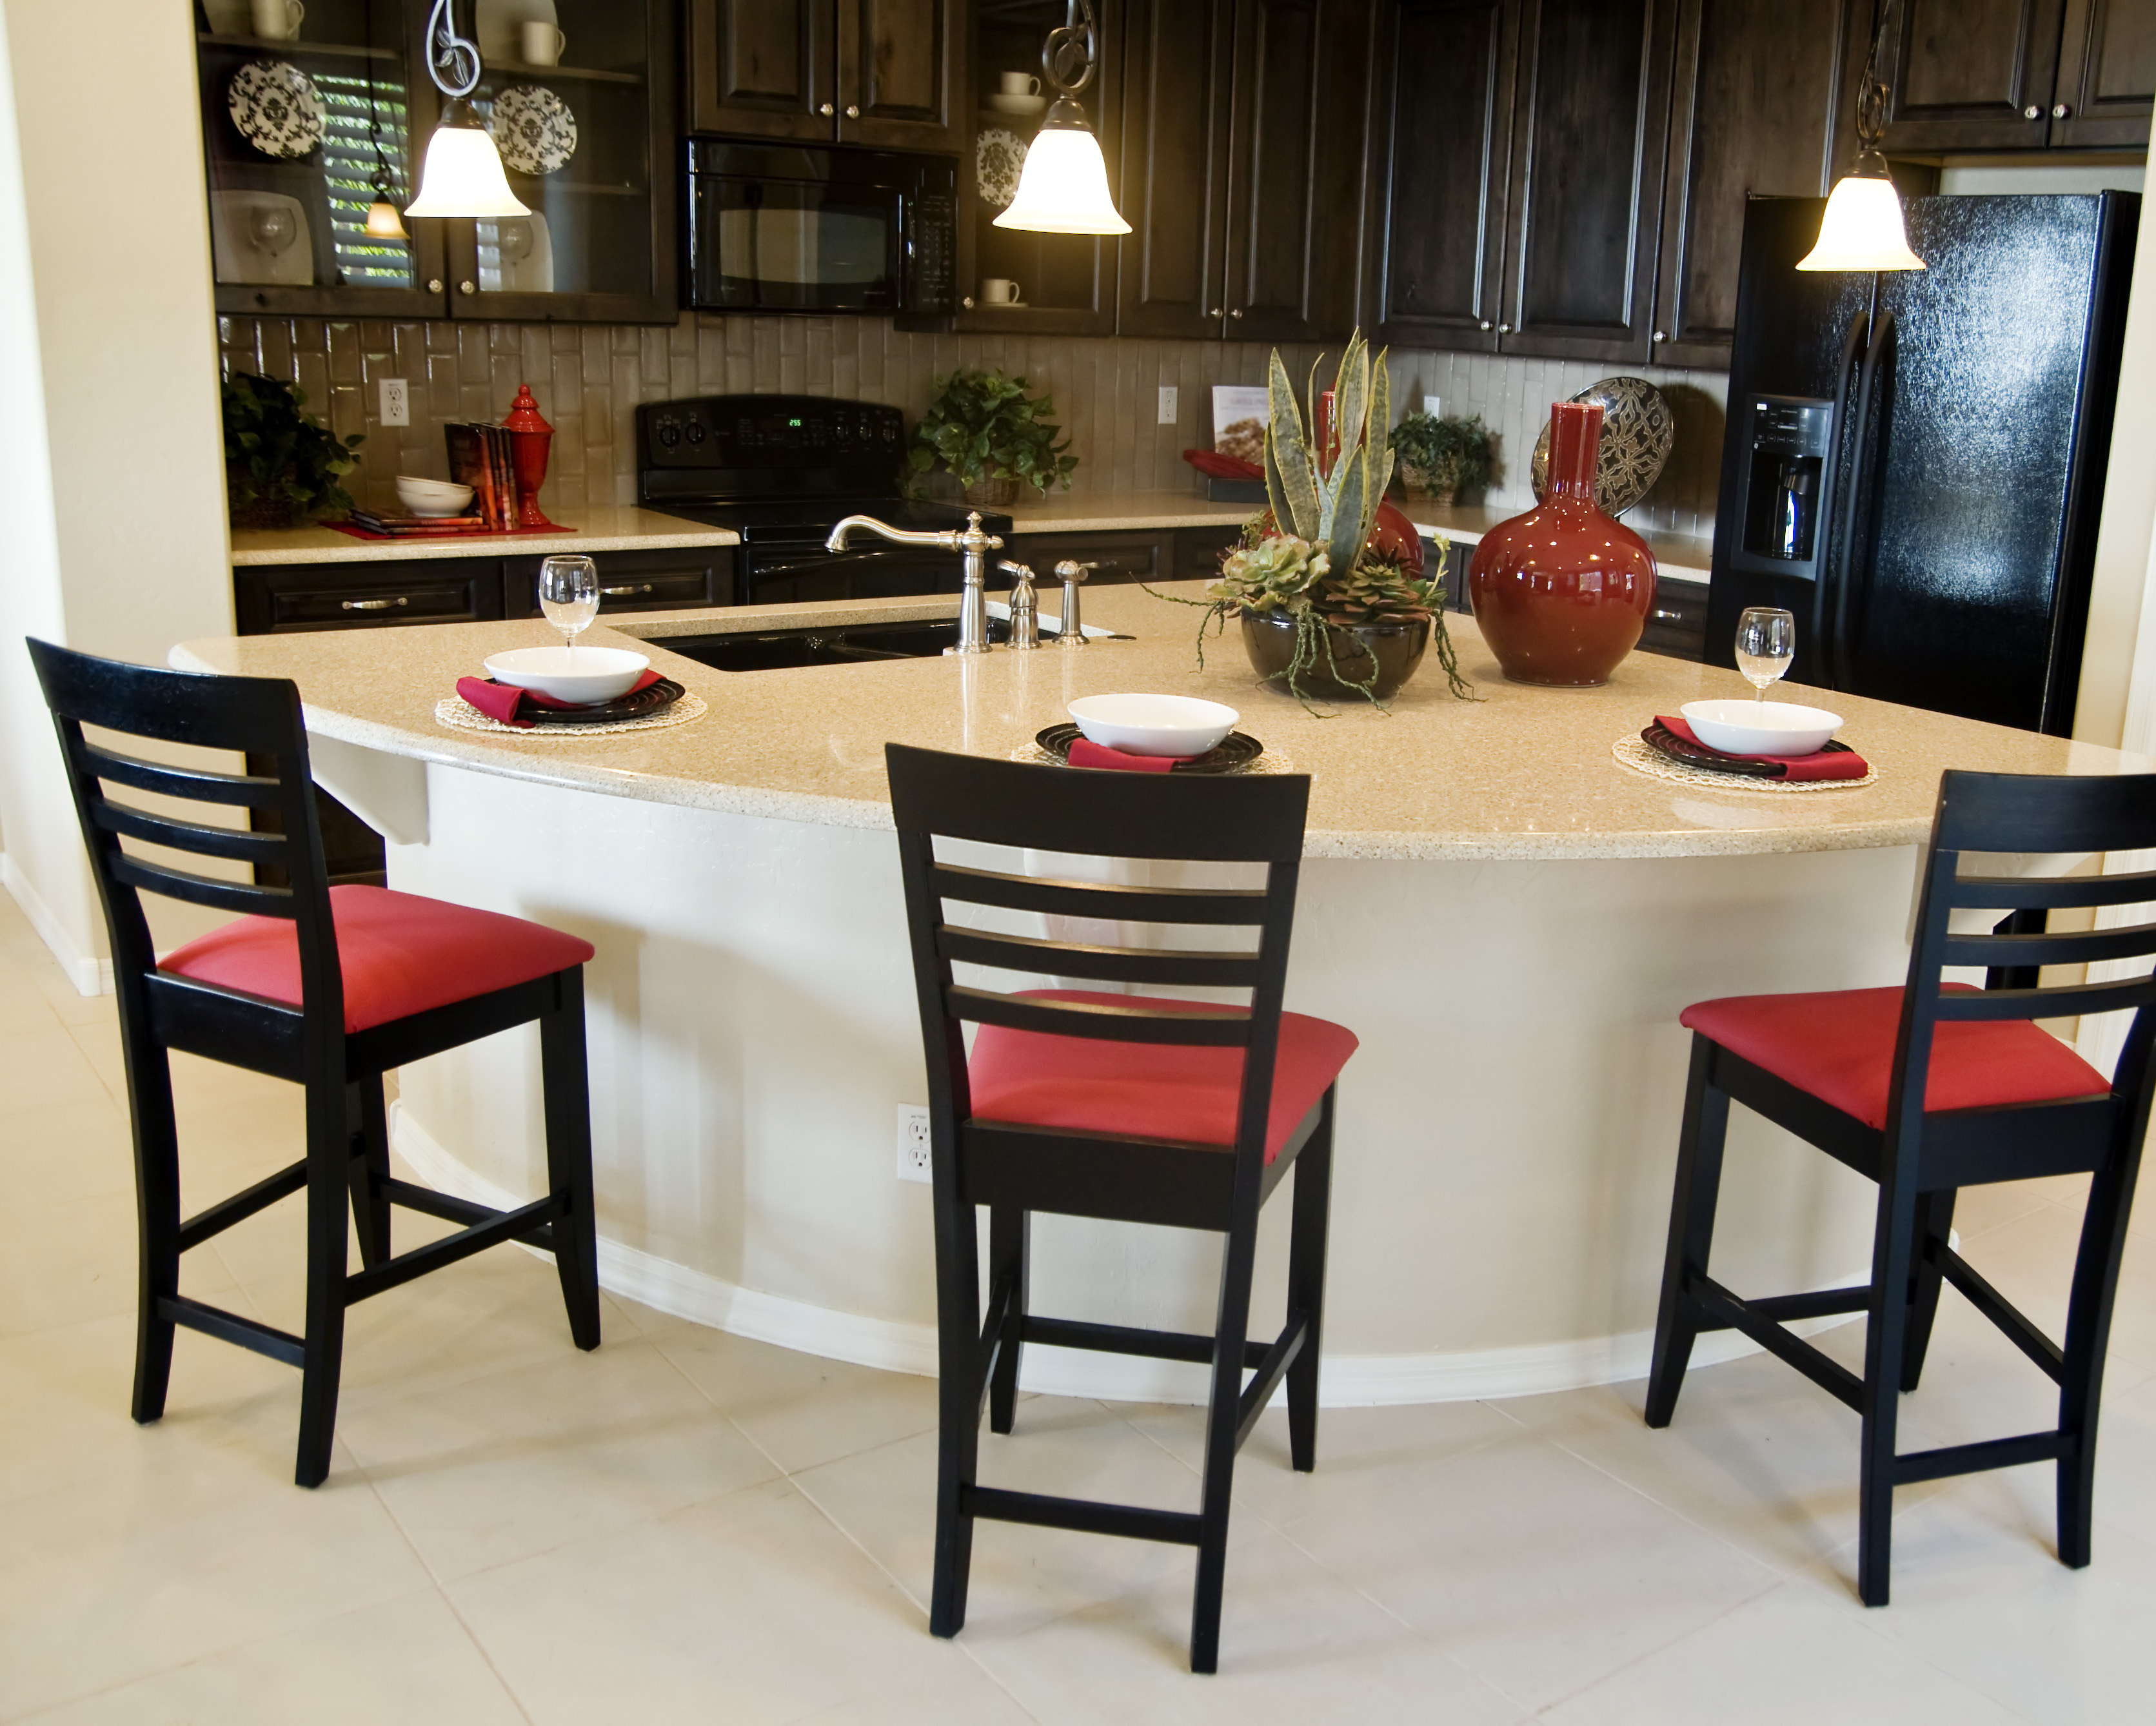 Kitchen With Red Accent Color